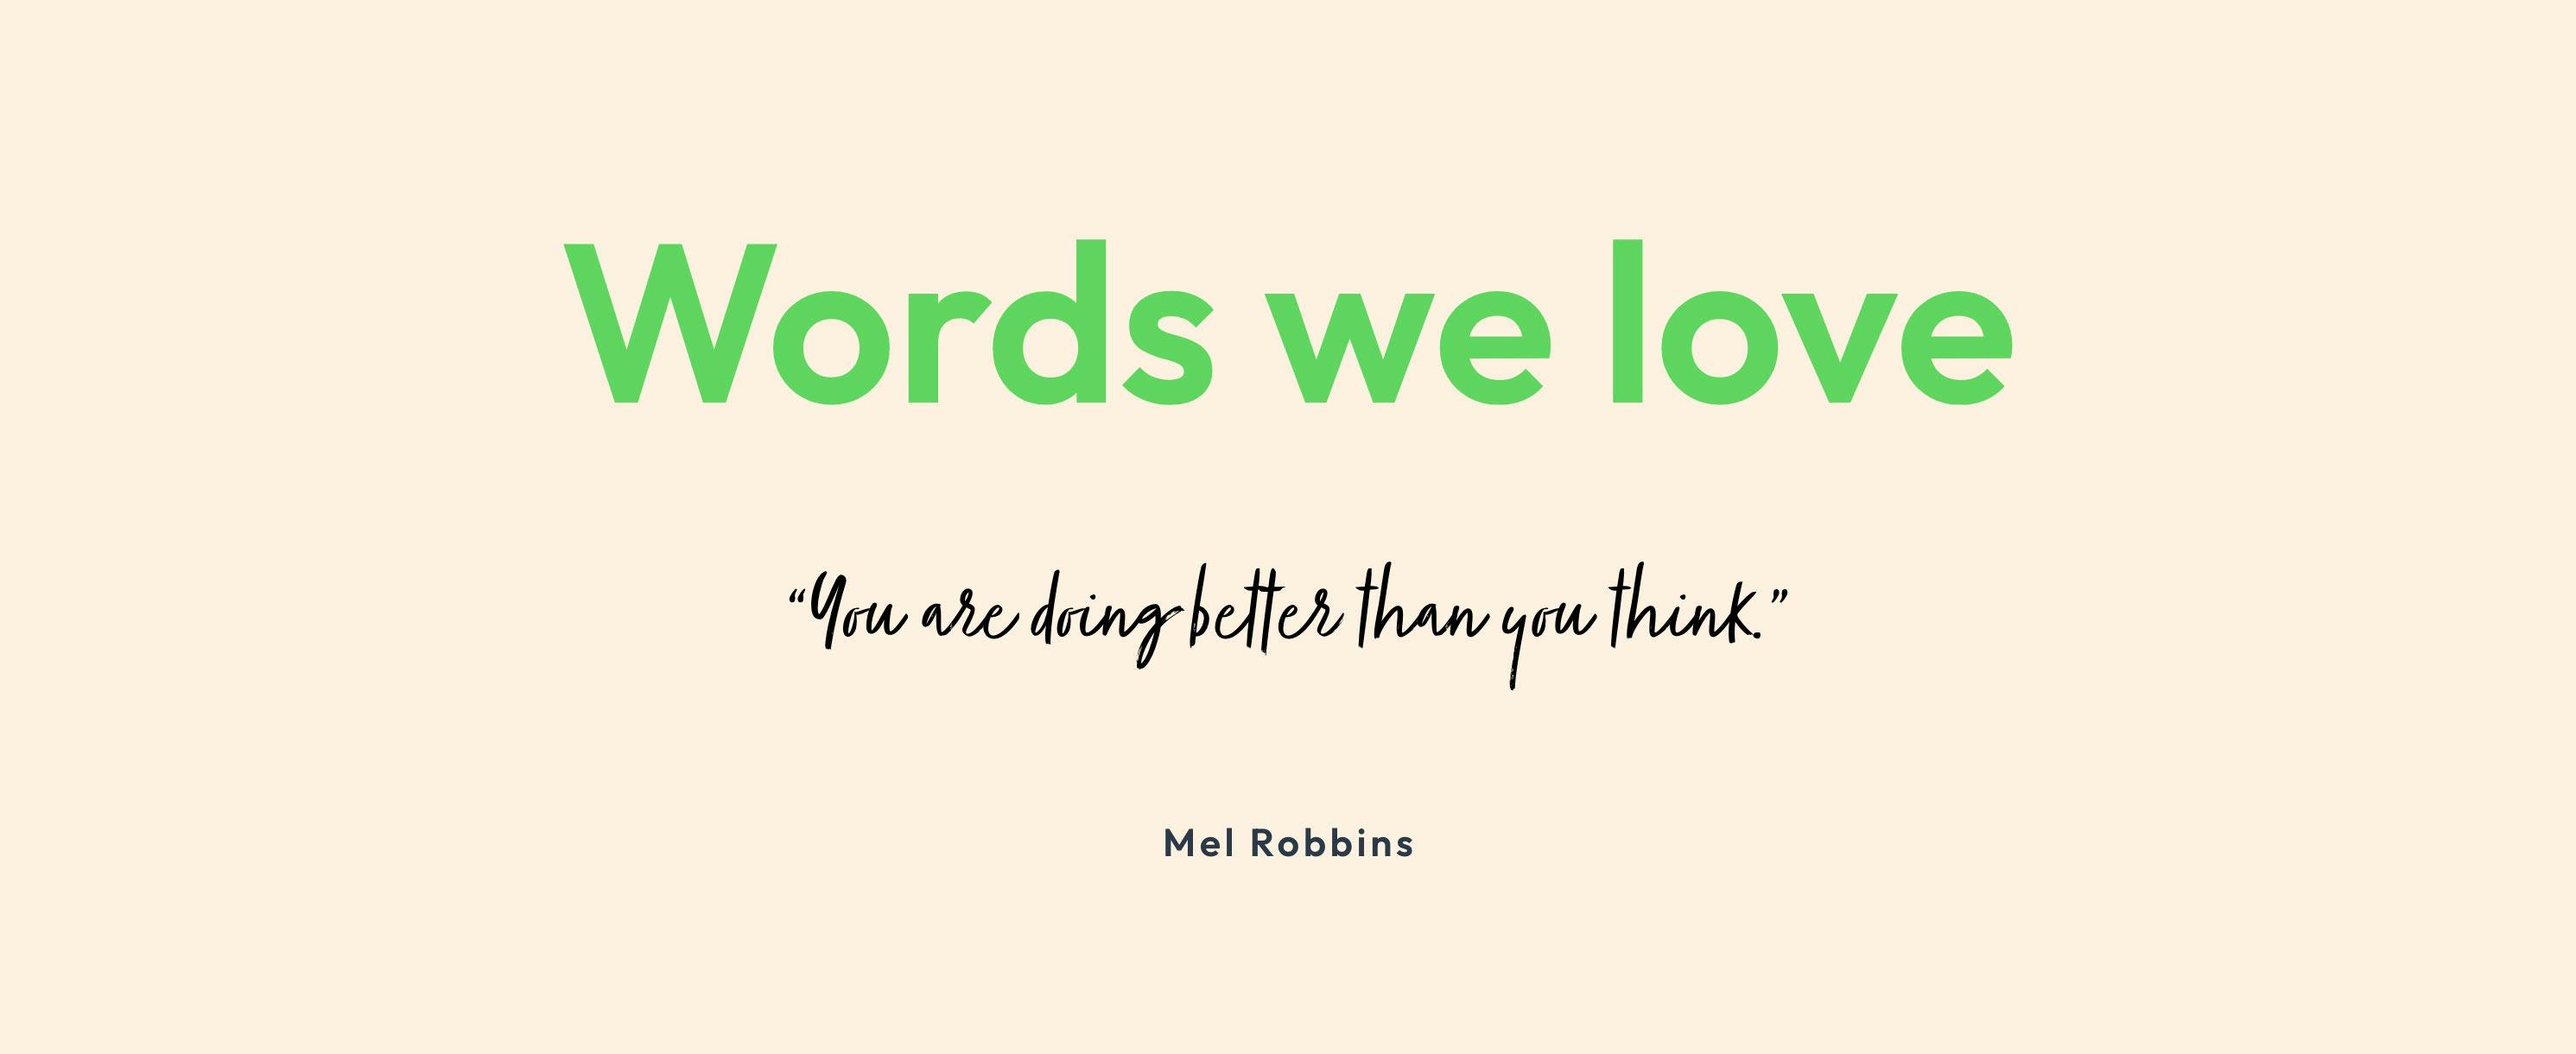 words we love - you are doing better than you think